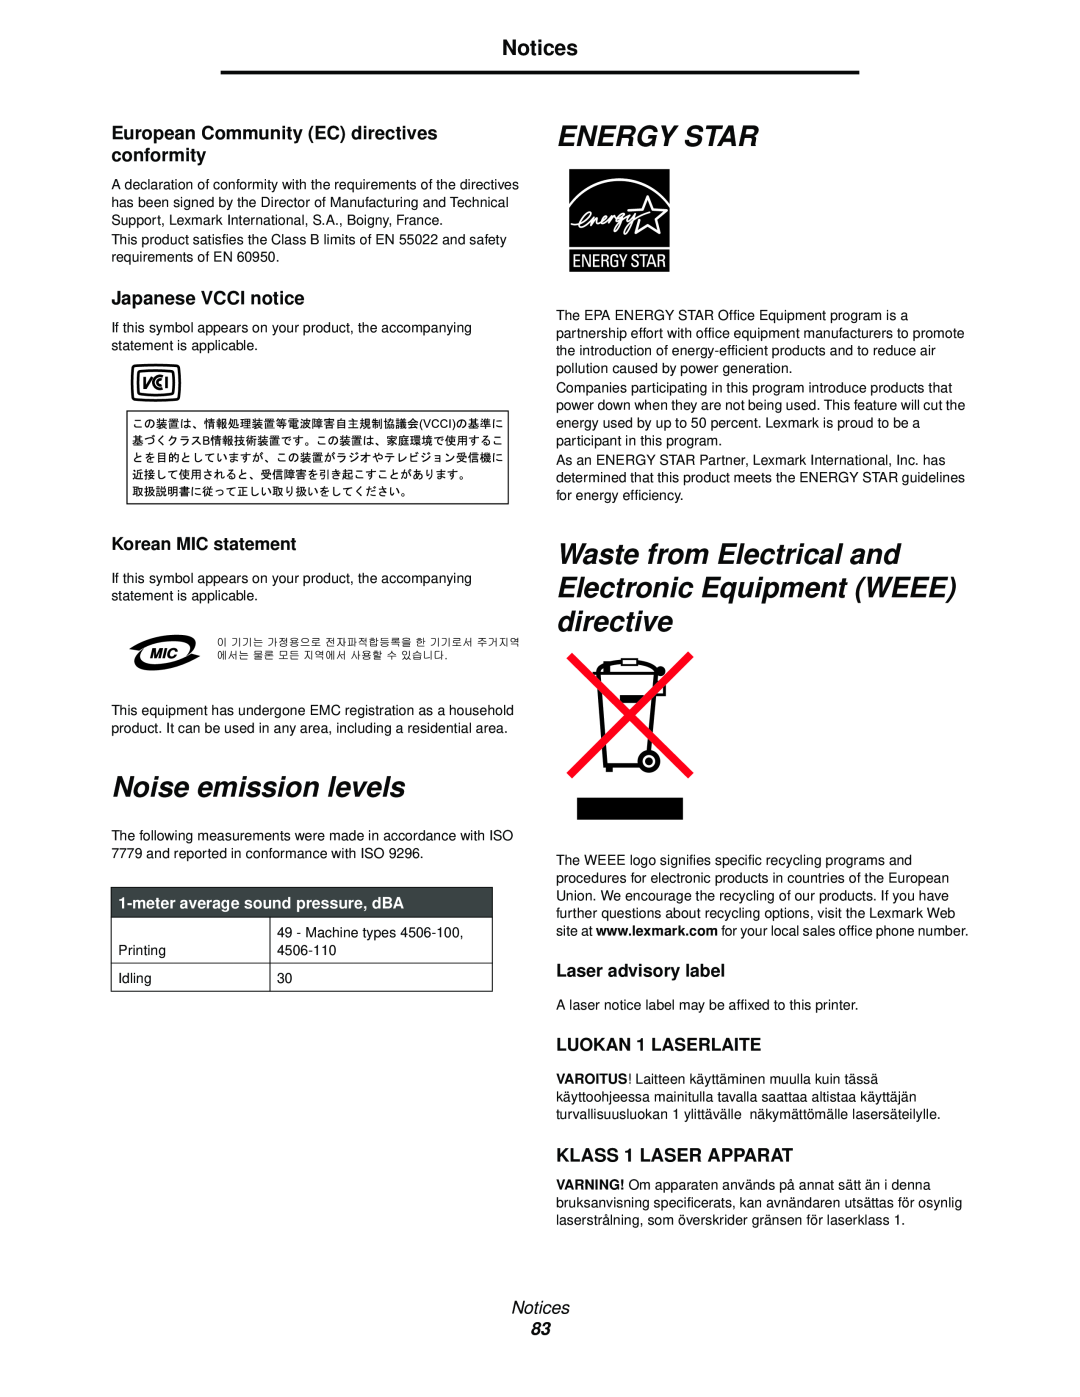 Lexmark 120 Energy Star, Noise emission levels, Waste from Electrical and Electronic Equipment WEEE directive, Notices 